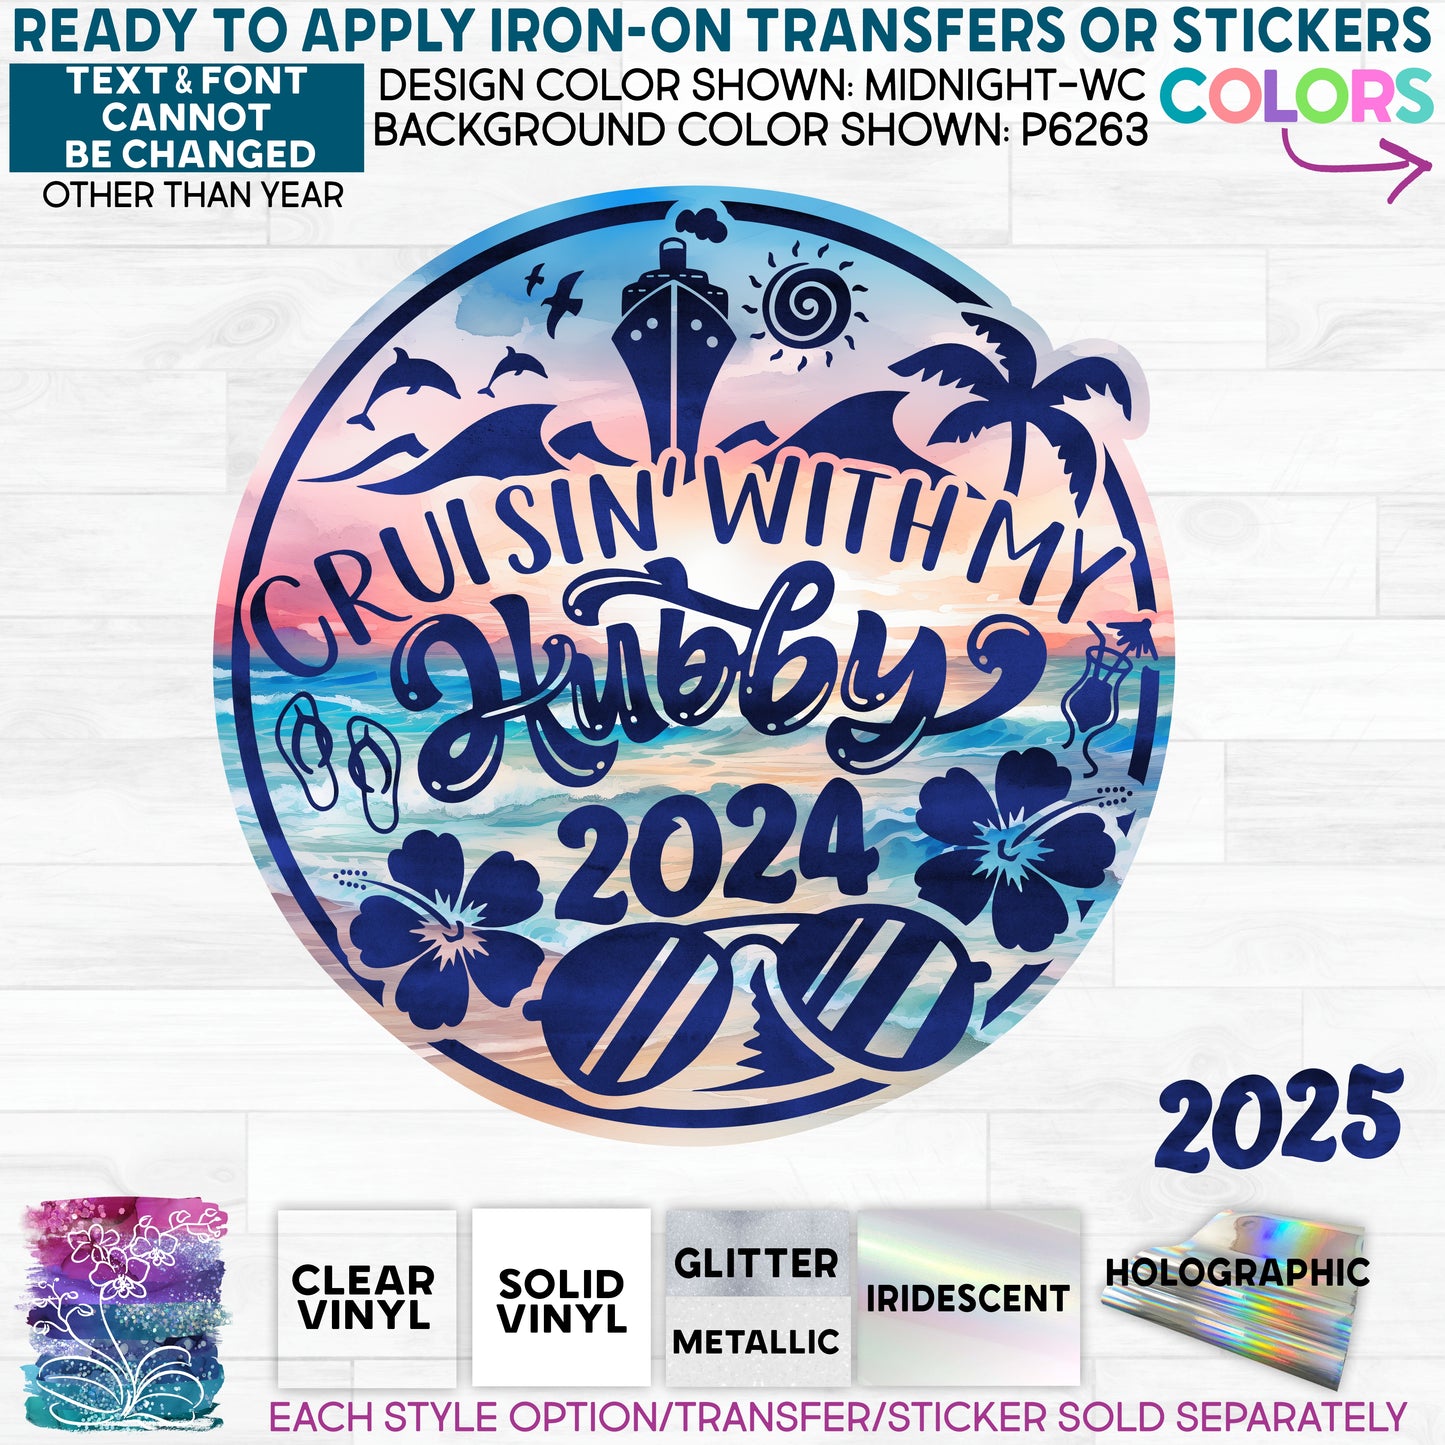 (s329-Q) Cruisin with my Hubby 2024 Any Year Glitter or Vinyl Iron-On Transfer or Sticker